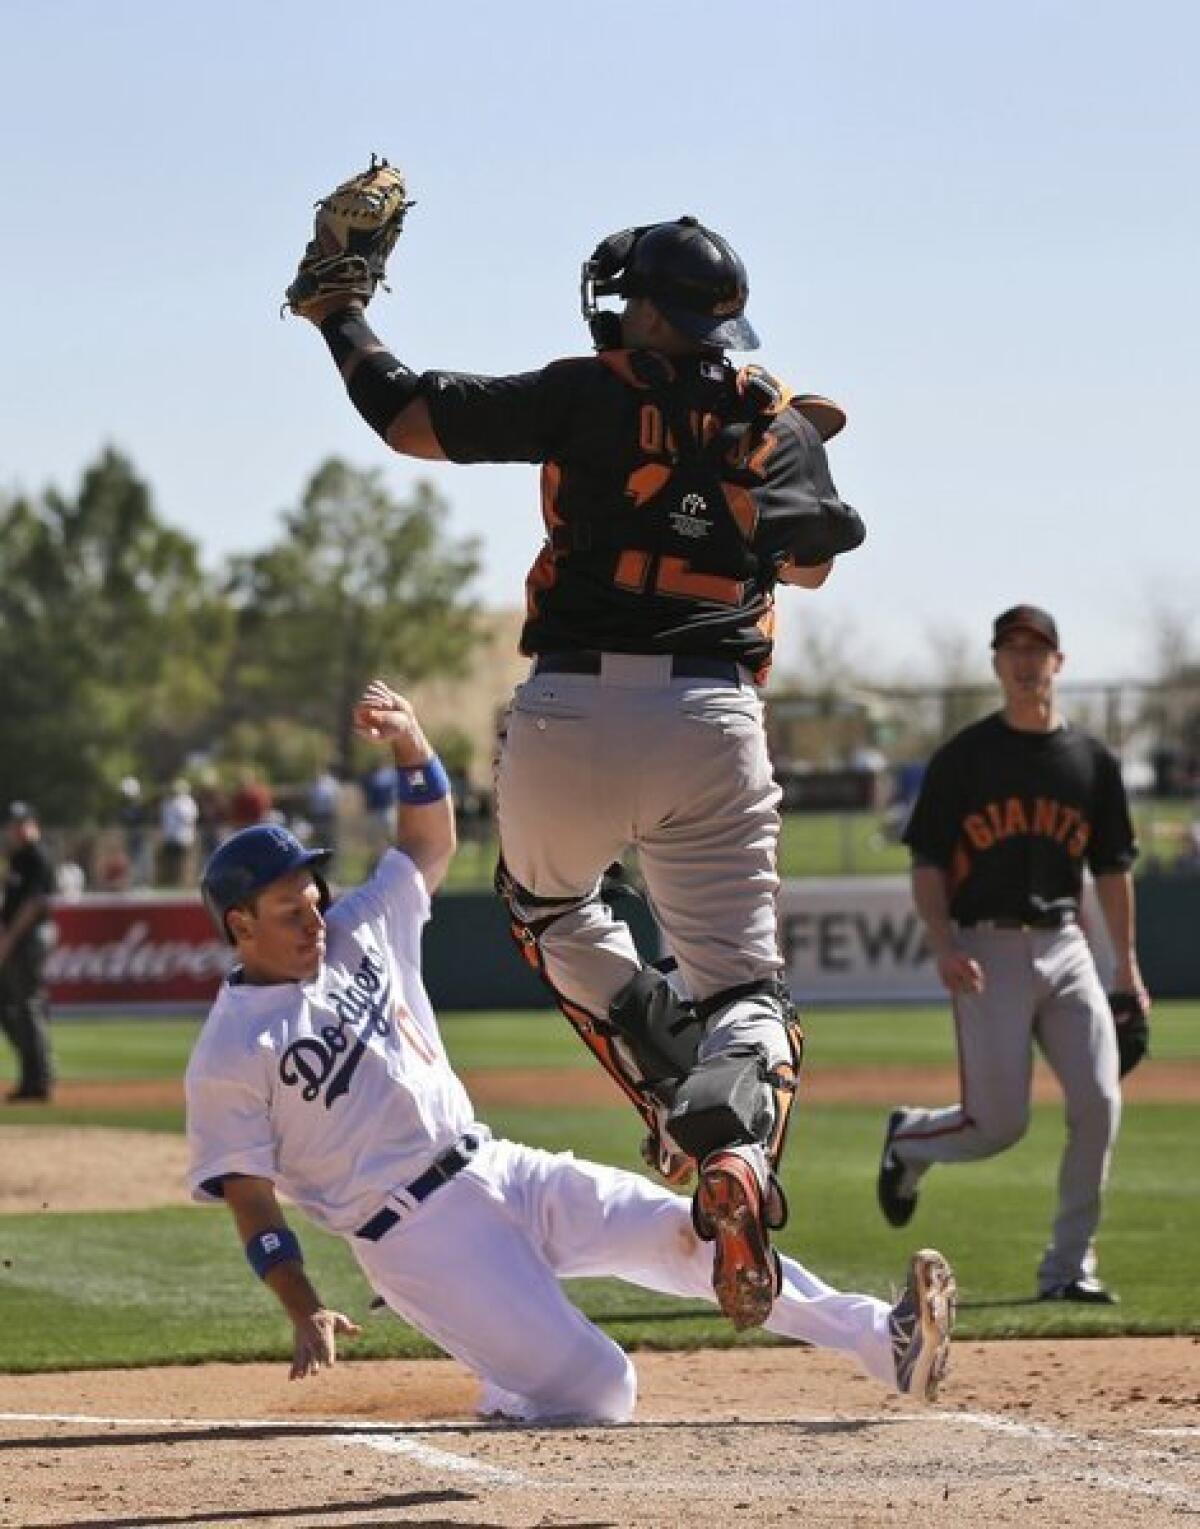 Mark Ellis scores on a double by Jeremy Moore as San Francisco Giants catcher Guillermo Quiroz catches a high throw during the second inning of an exhibition spring training baseball game on Tuesday, Feb. 26, 2013 in Glendale.